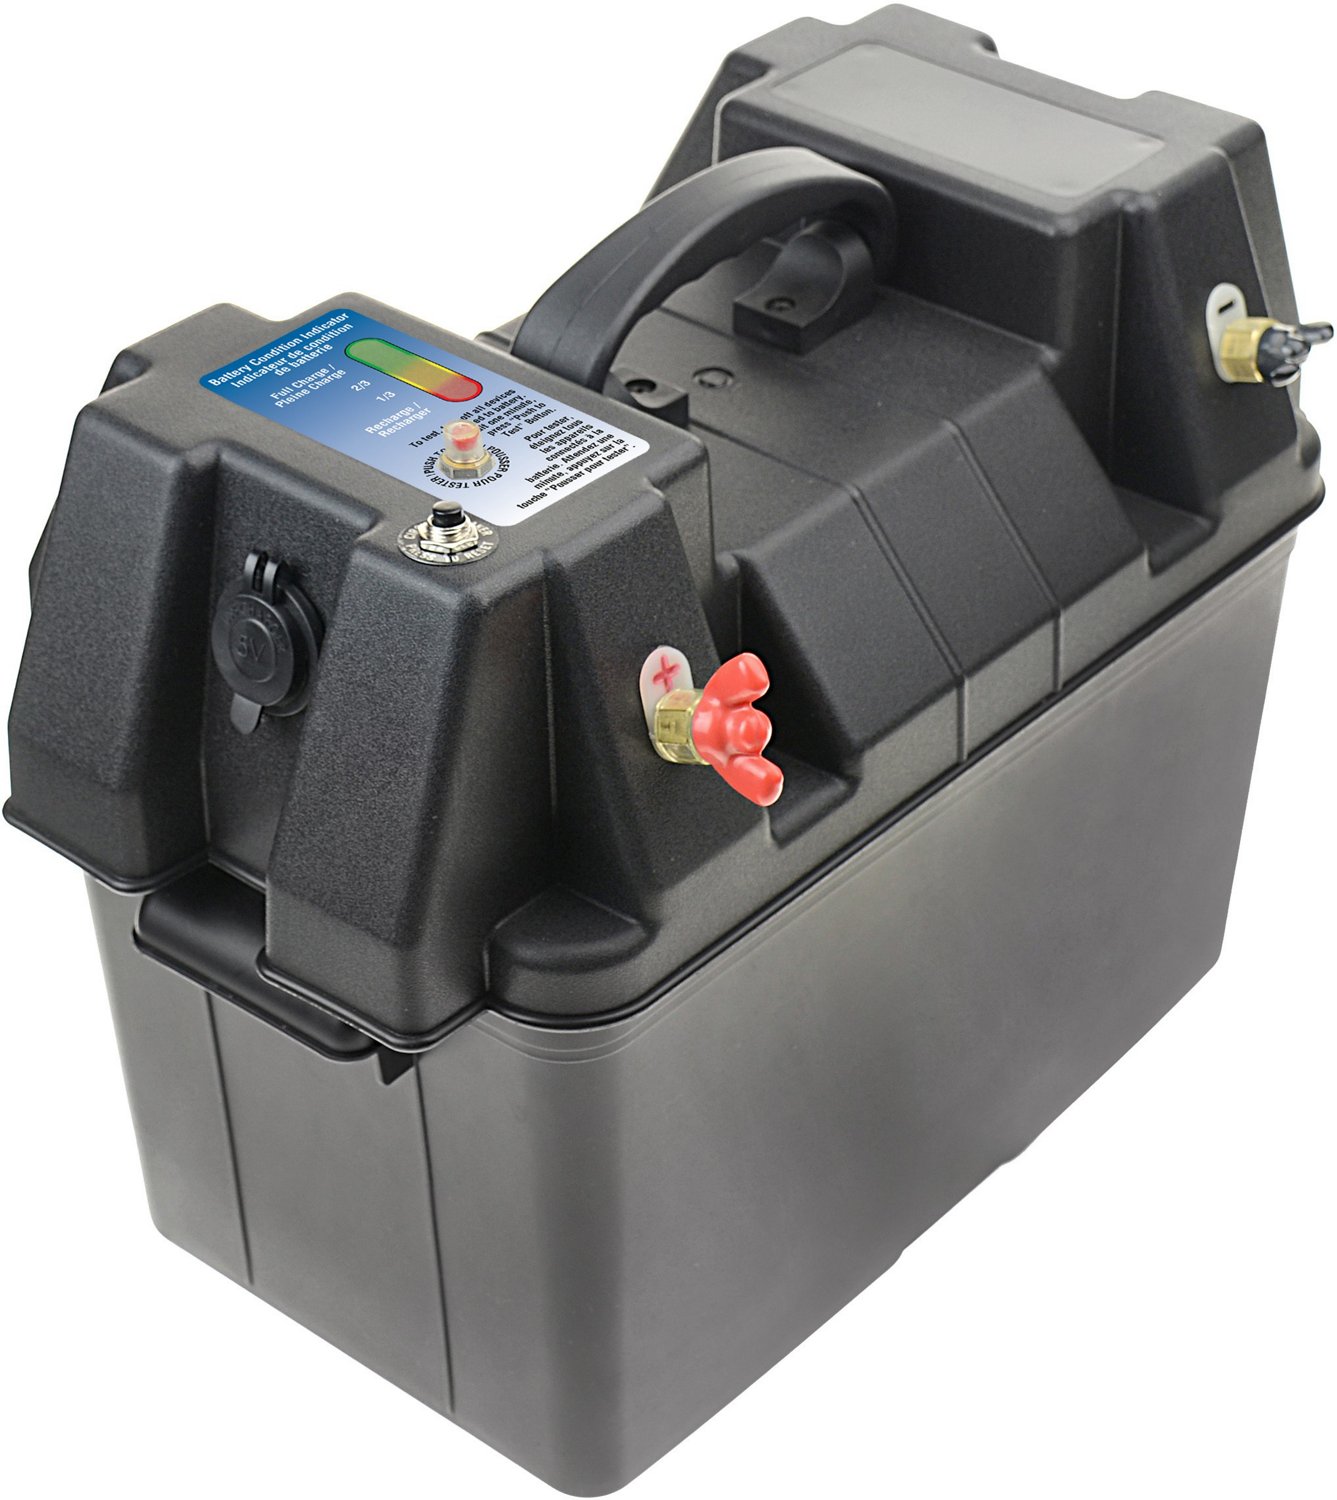 Marine Raider Battery Box Power Station with Handle and USB Power